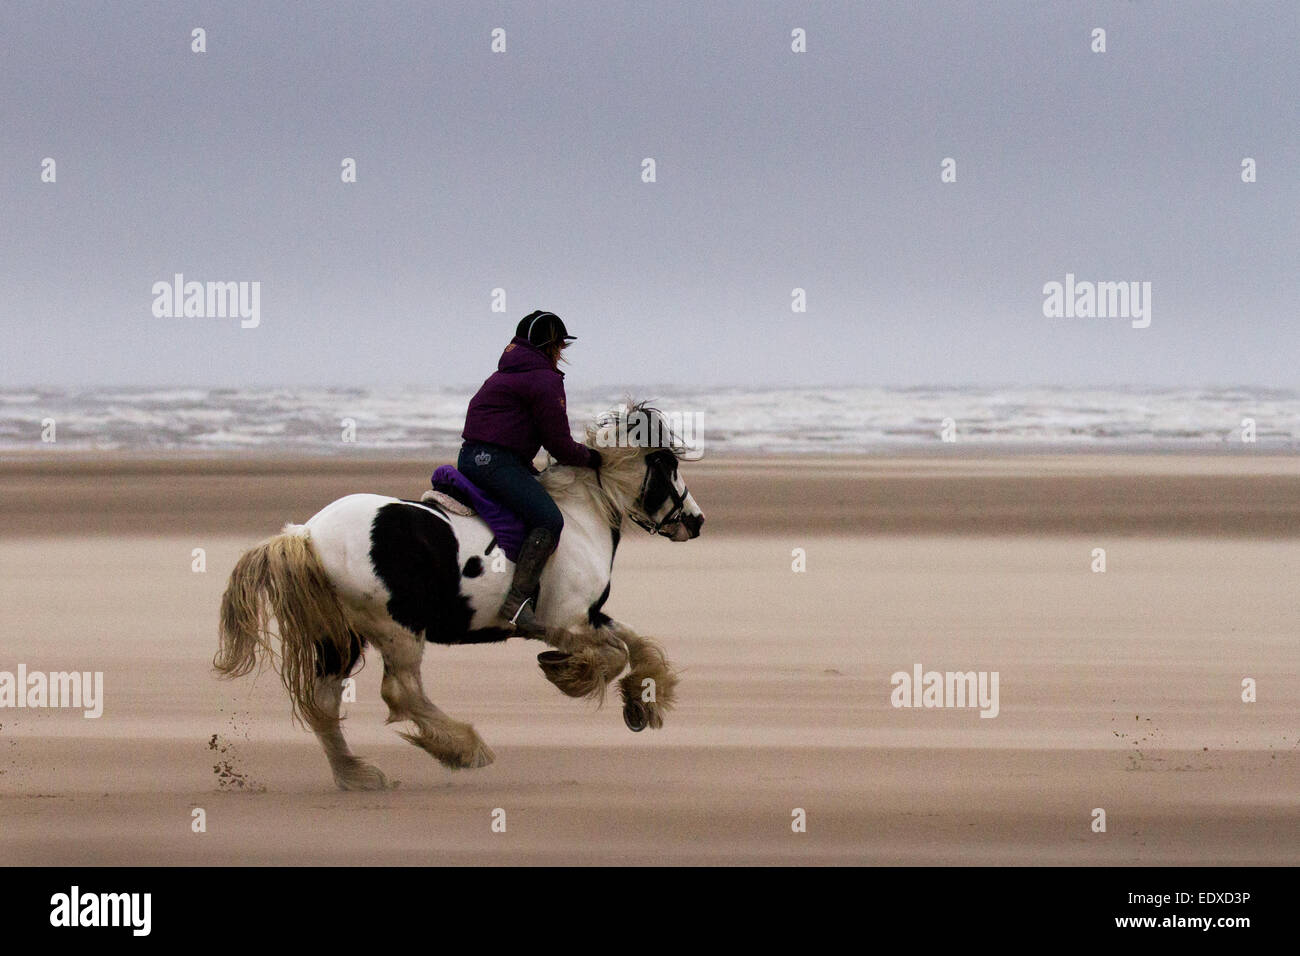 Southport, Merseyside, UK.   11th January, 2015 UK Weather. 'Galloping horses'   Horse rider, Hayley Davies, taking advantage of the long expanse of fine firm sand to exercise her horse, albeit in difficult conditions with gale force wind blown sand.  Activities, sports, and pursuits on the beach at Ainsdale in spite of the high winds, rough seas and overcast skies.  Credit:  Mar Photographics/Alamy Live News Stock Photo